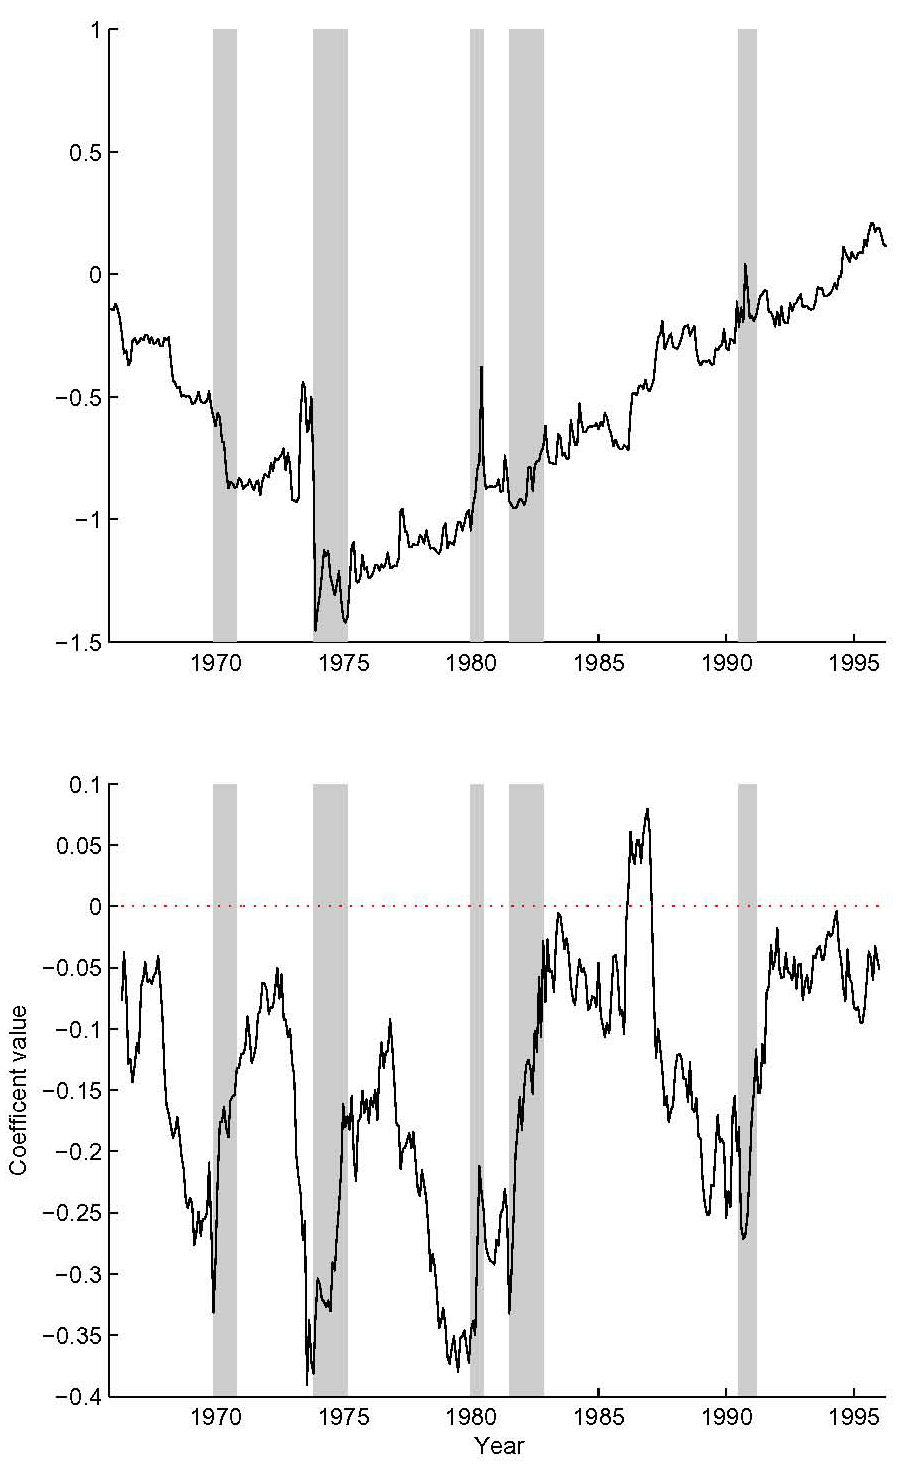 Figure 5, top panel: time series of Philips curve inflation response estimates from model without data uncertainty. Bottom panel: time series of Philips curve inflation response estimates from model including data uncertainty. NBER recessions are shaded. The top panel shows a sharp negative decrease around 1973, and then steady trend upward crossing 0 around 1990. The bottom panel shows a trade-off that closely mirrors the low-frequency movement of inflation.